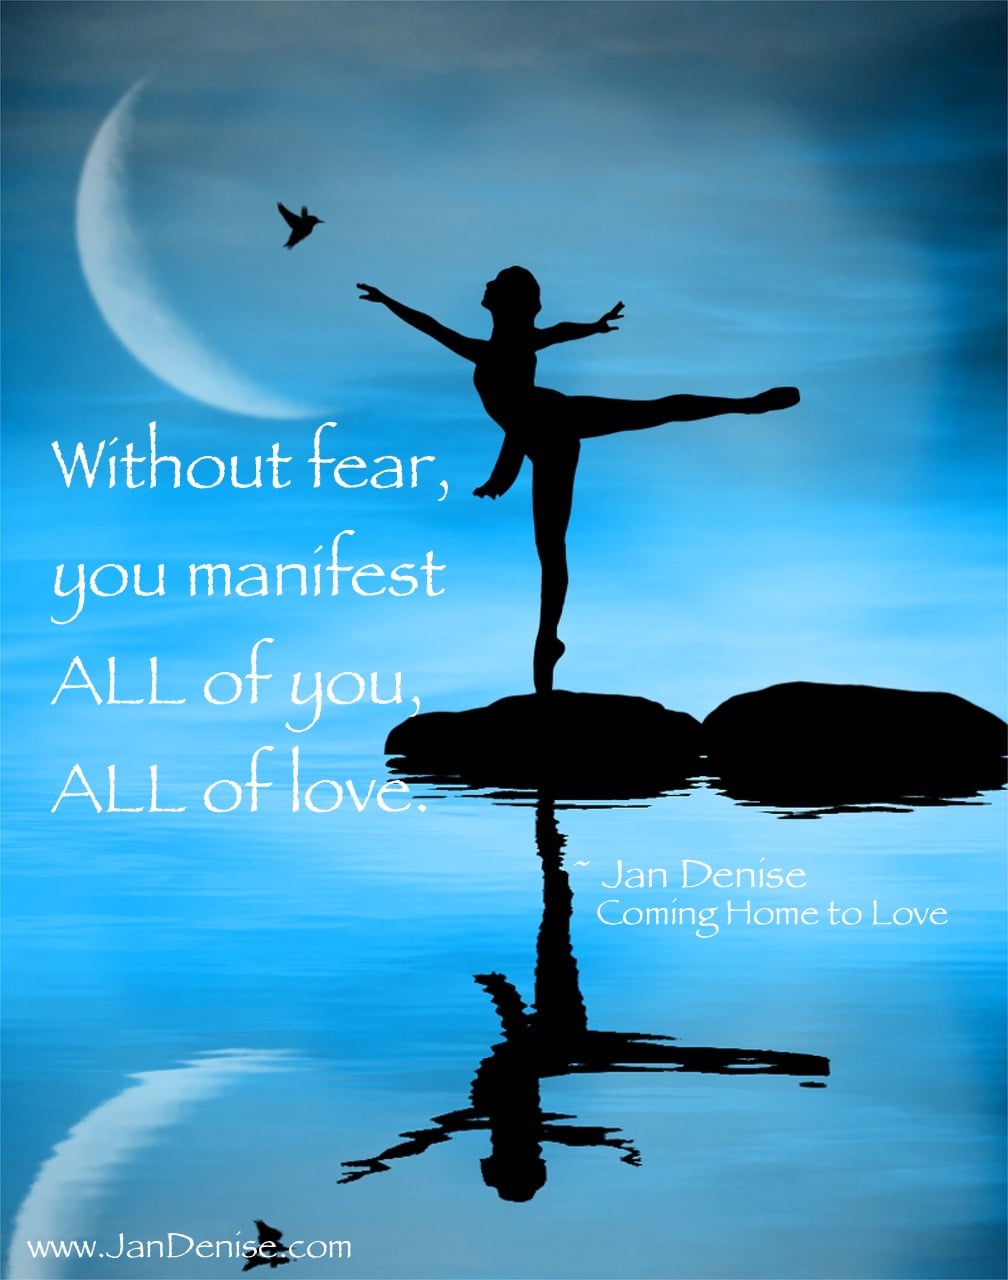 Without fear, there is only love …